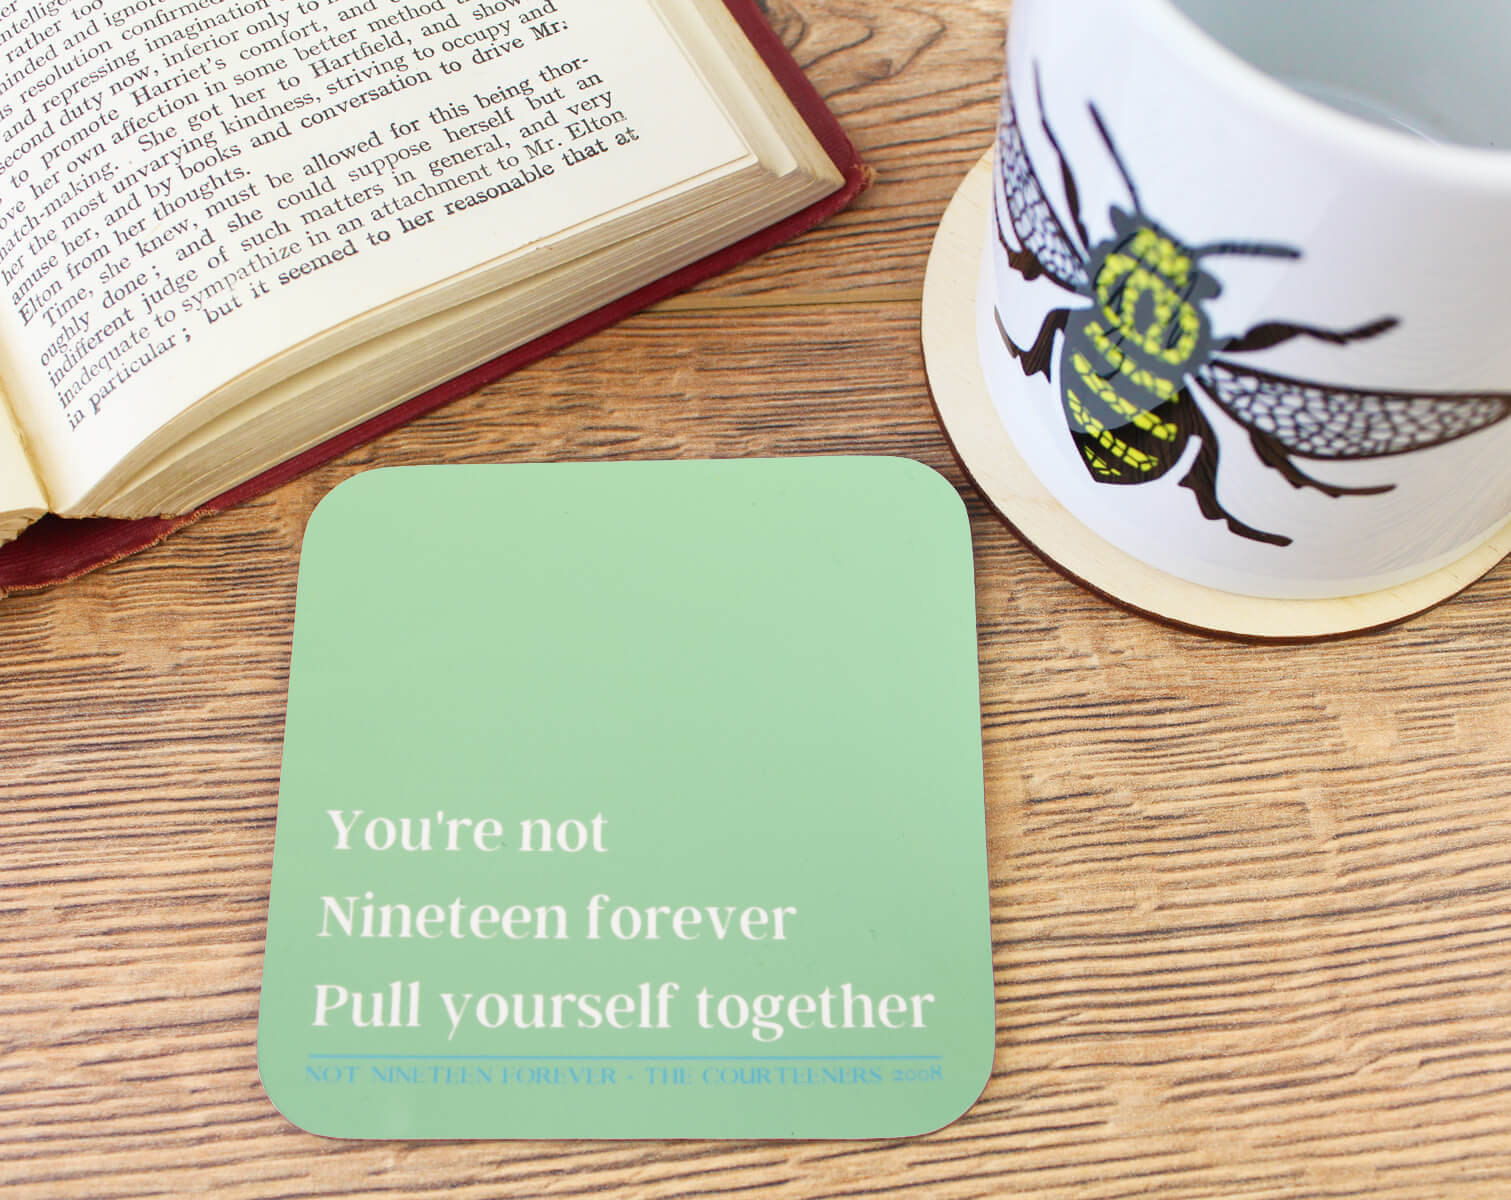 Courteeners Coaster | The Manchester Shop